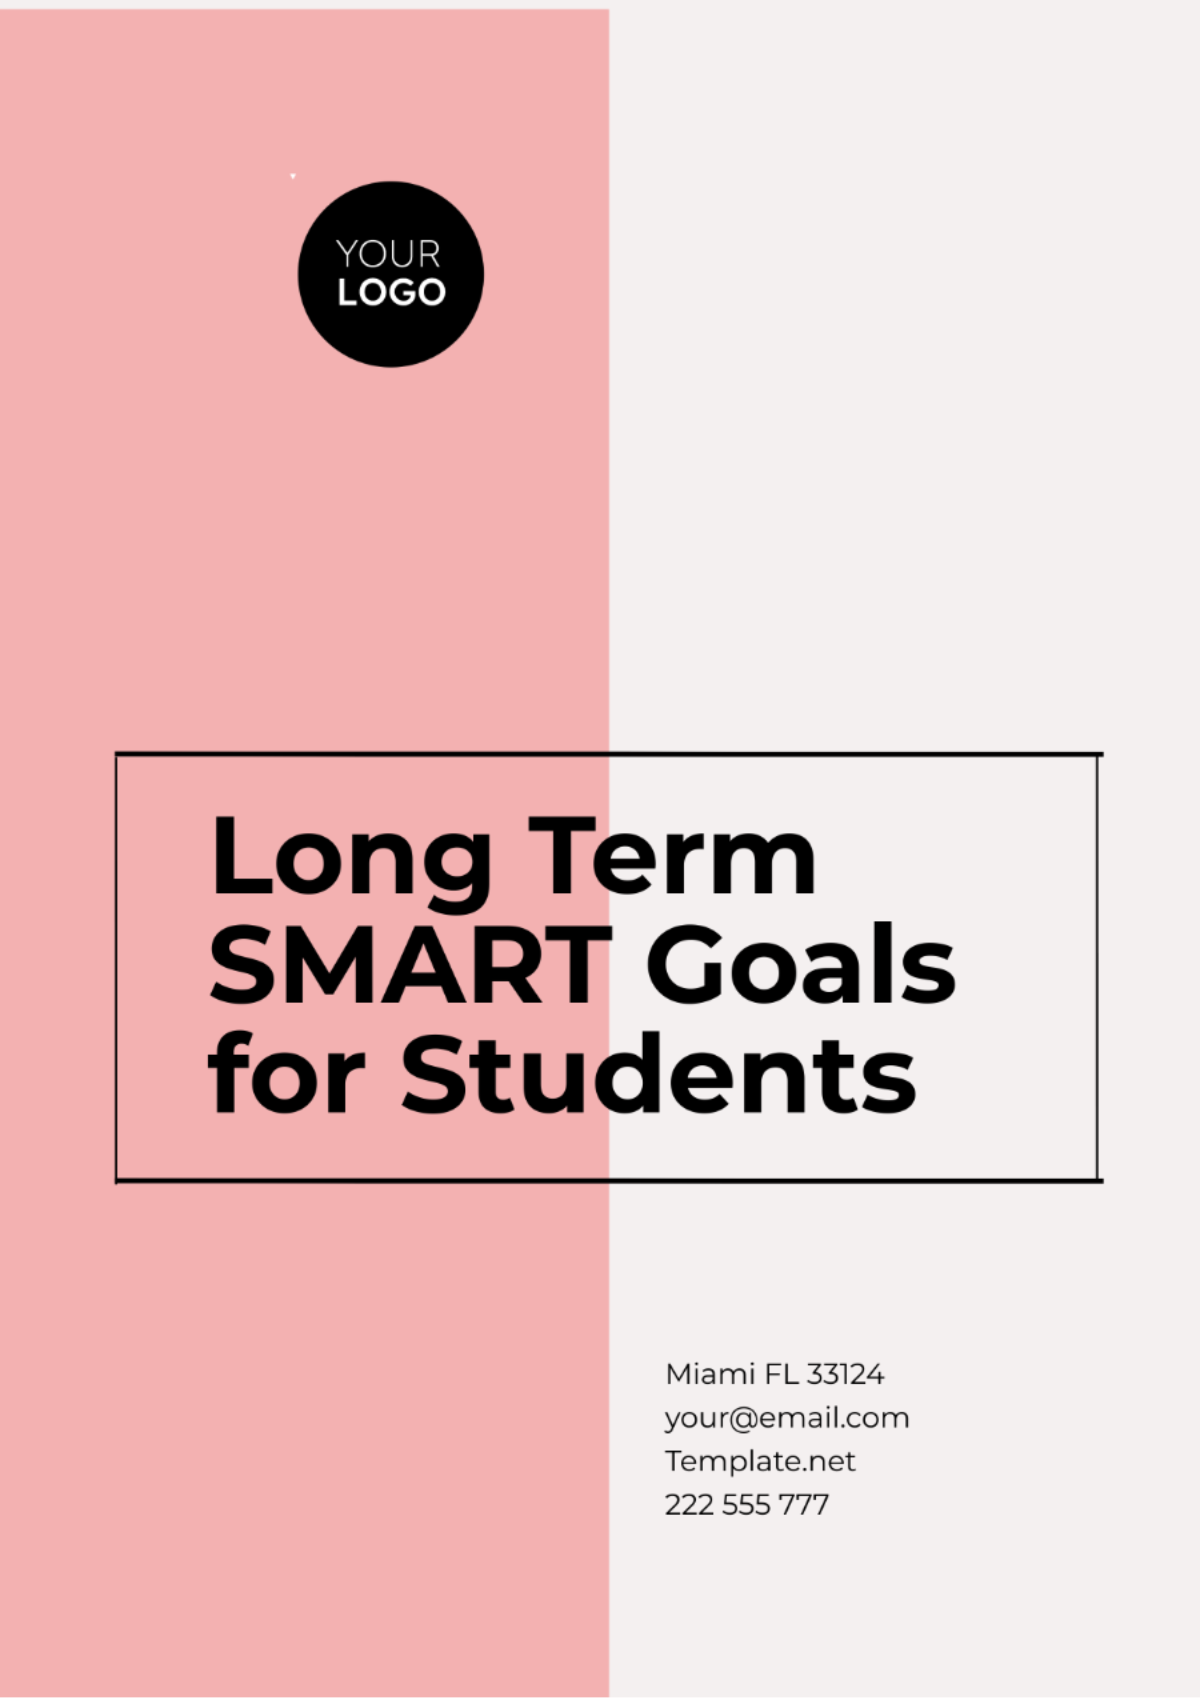 Long Term SMART Goals for Students Template